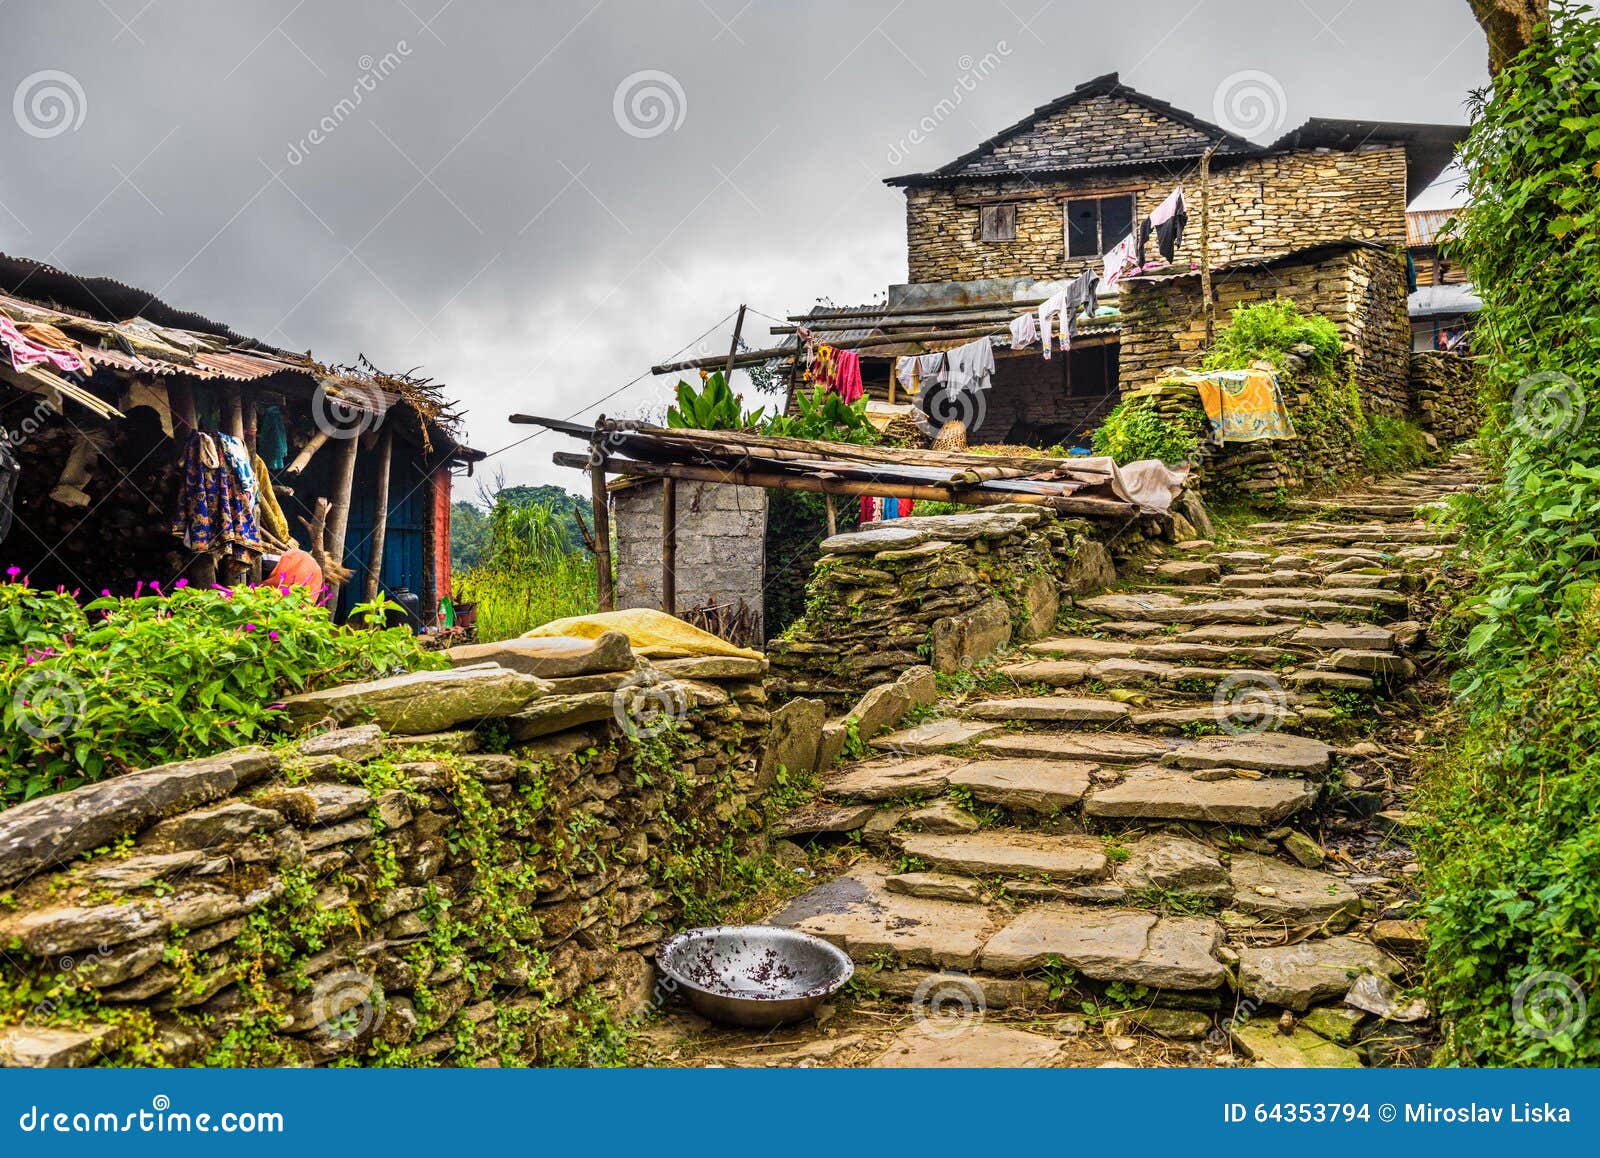 village of dhampus in the himalayas mountains in nepal